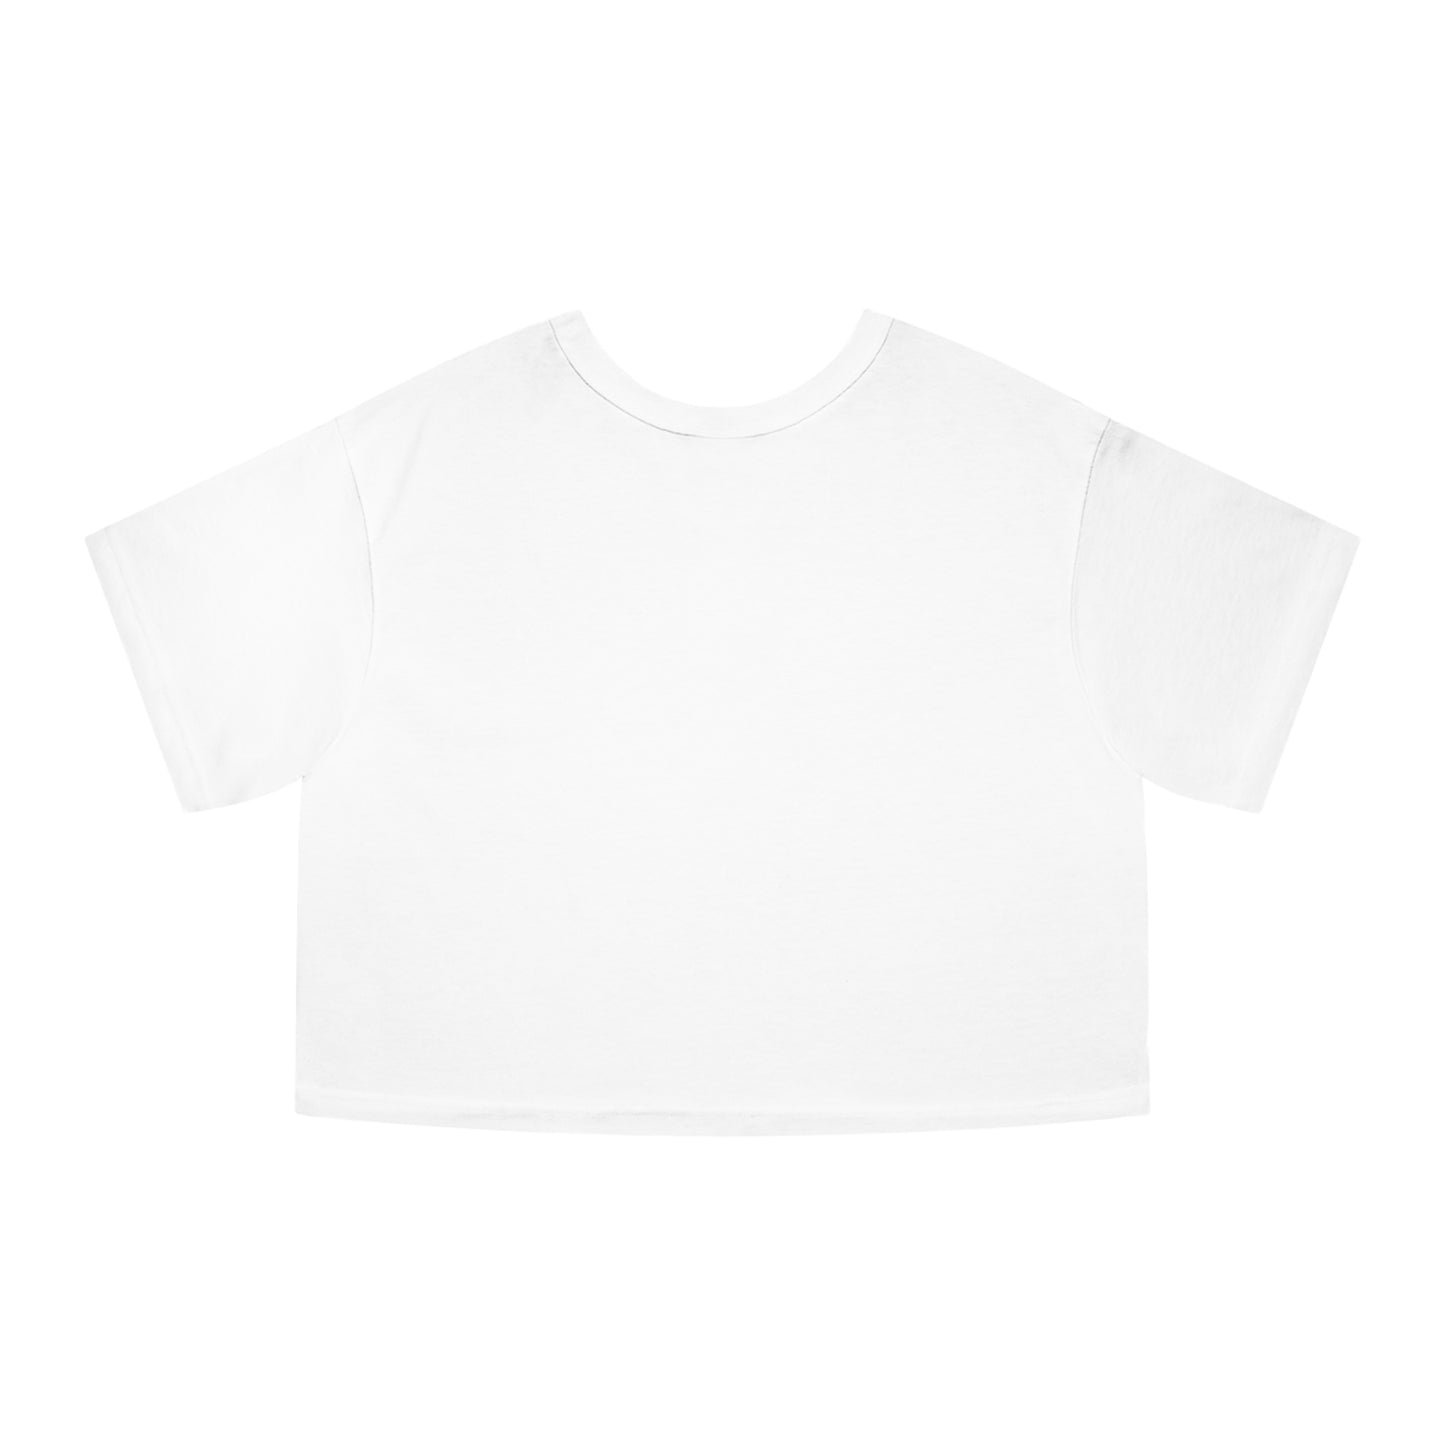 "The vibe is in shambles" - Champion crop top